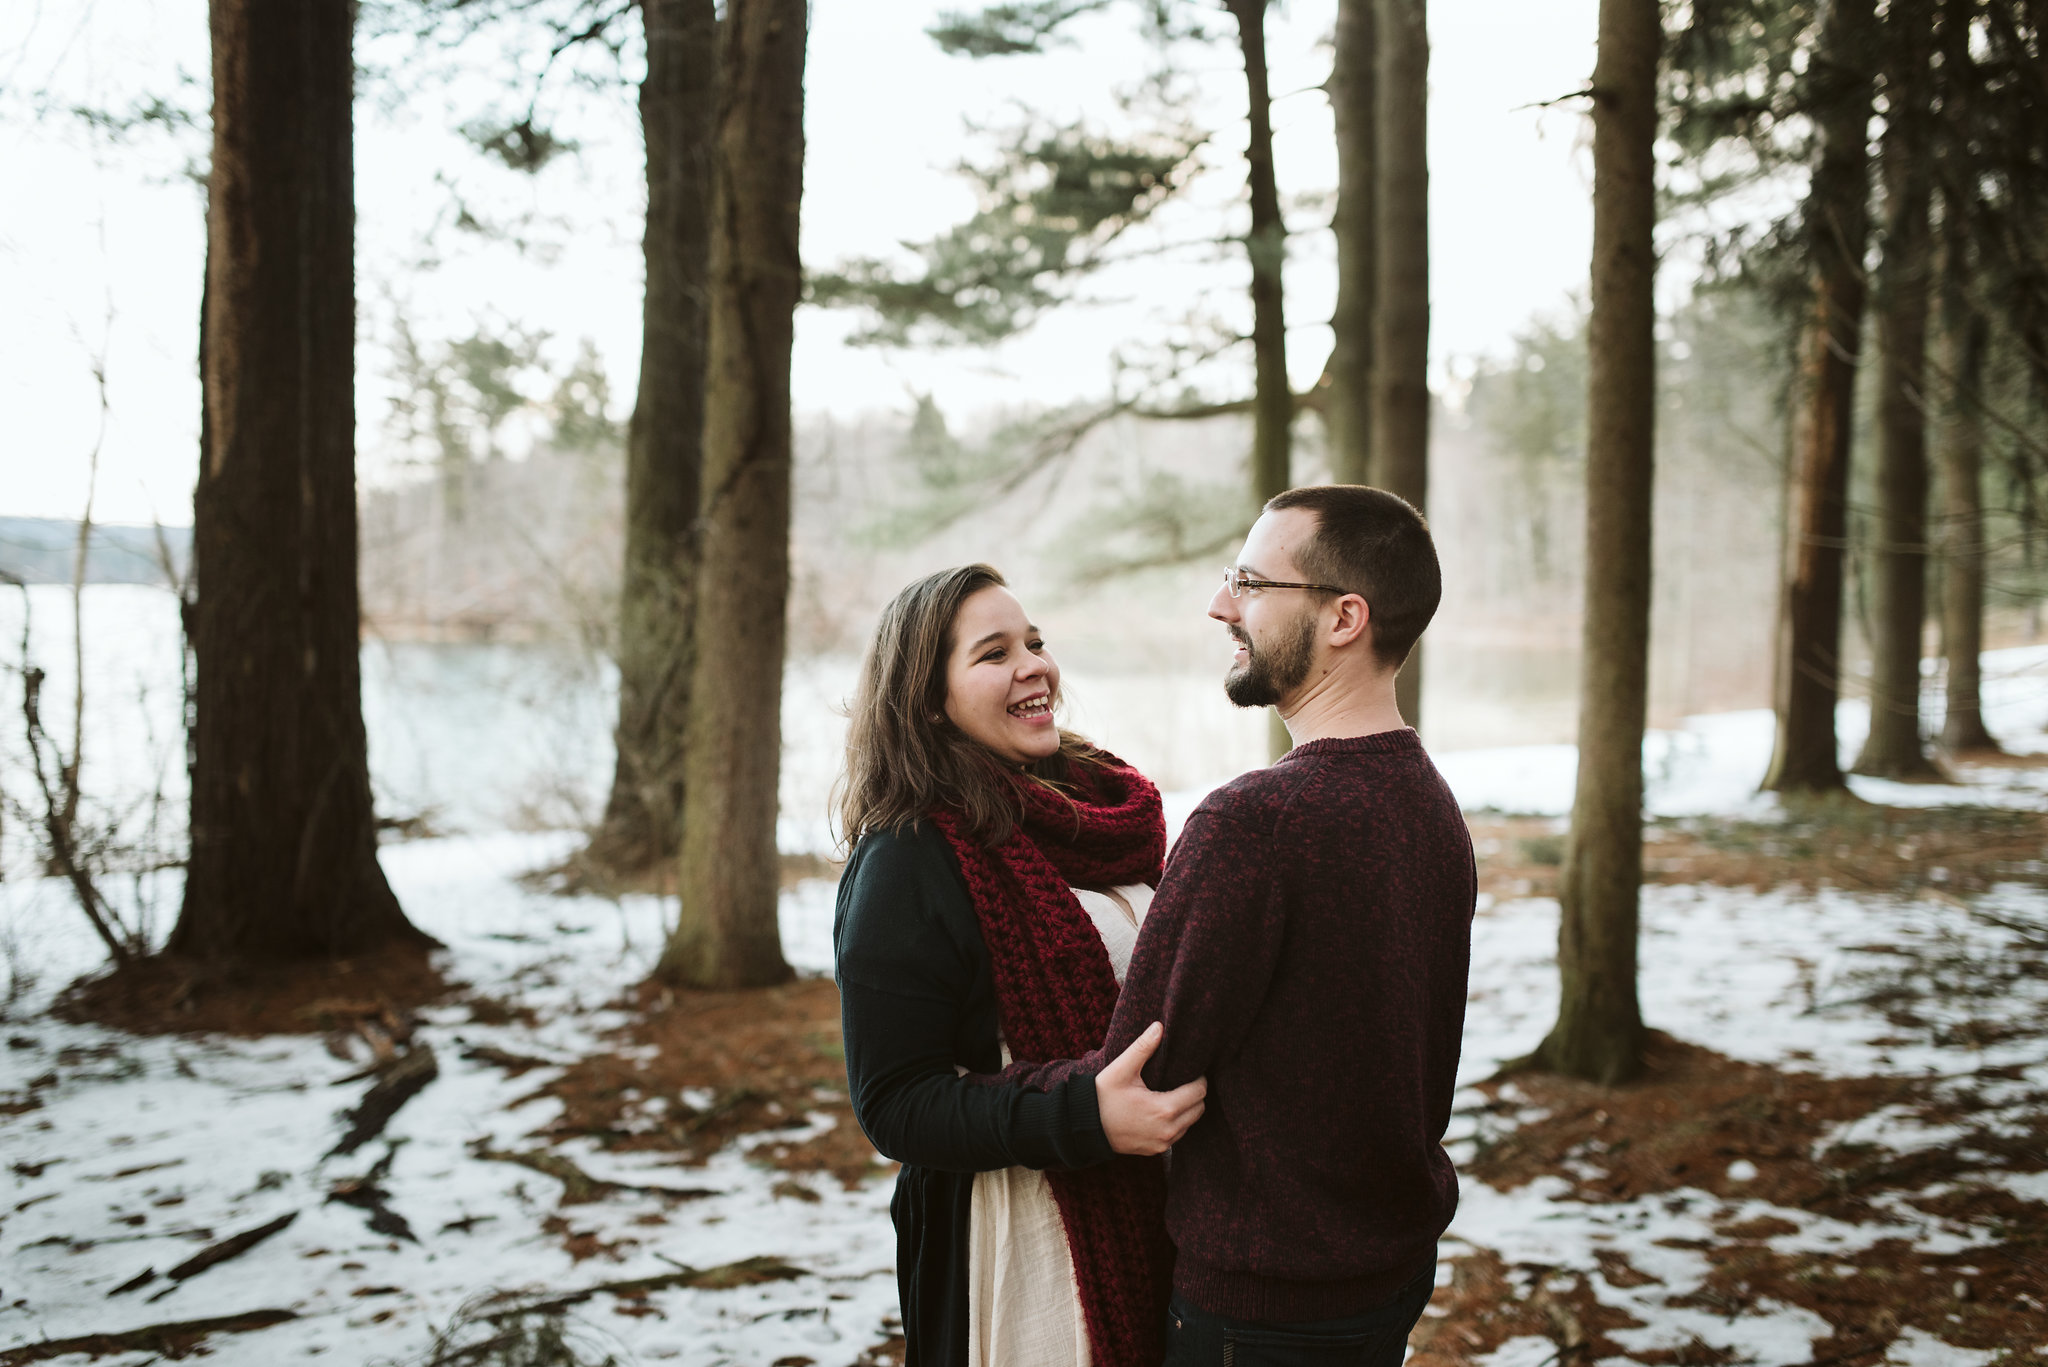  Baltimore County, Loch Raven Reservoir, Maryland Wedding Photographer, Winter, Engagement Photos, Nature, Romantic, Clean and Classic, Bride and Groom Laughing Together Outside with Snow on the Ground 